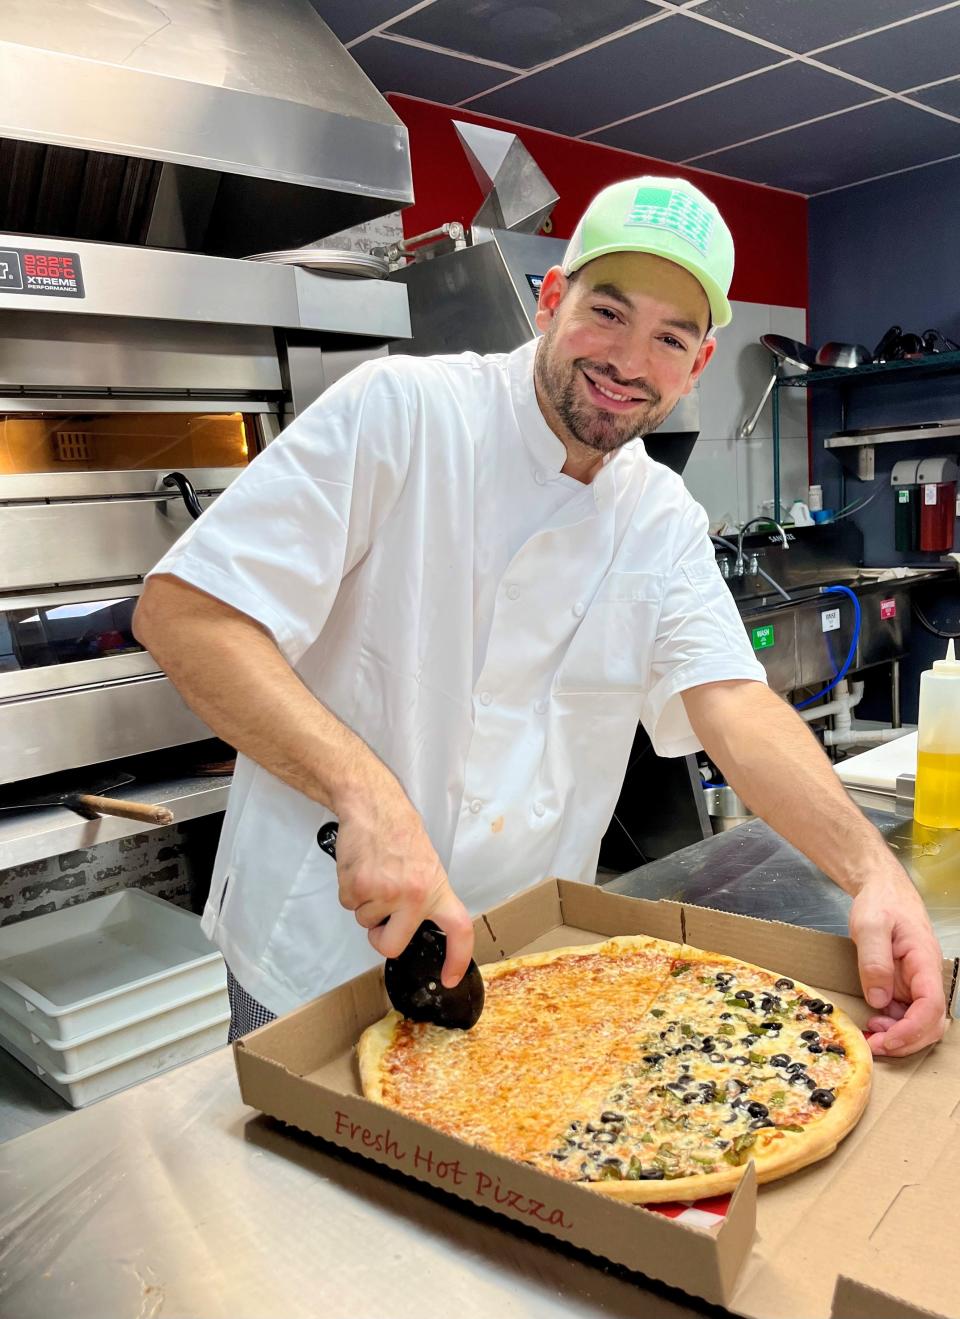 Daniel Stasolla opened Long Island Brothers New York Pizzeria off Skyline Boulevard in Cape Coral.